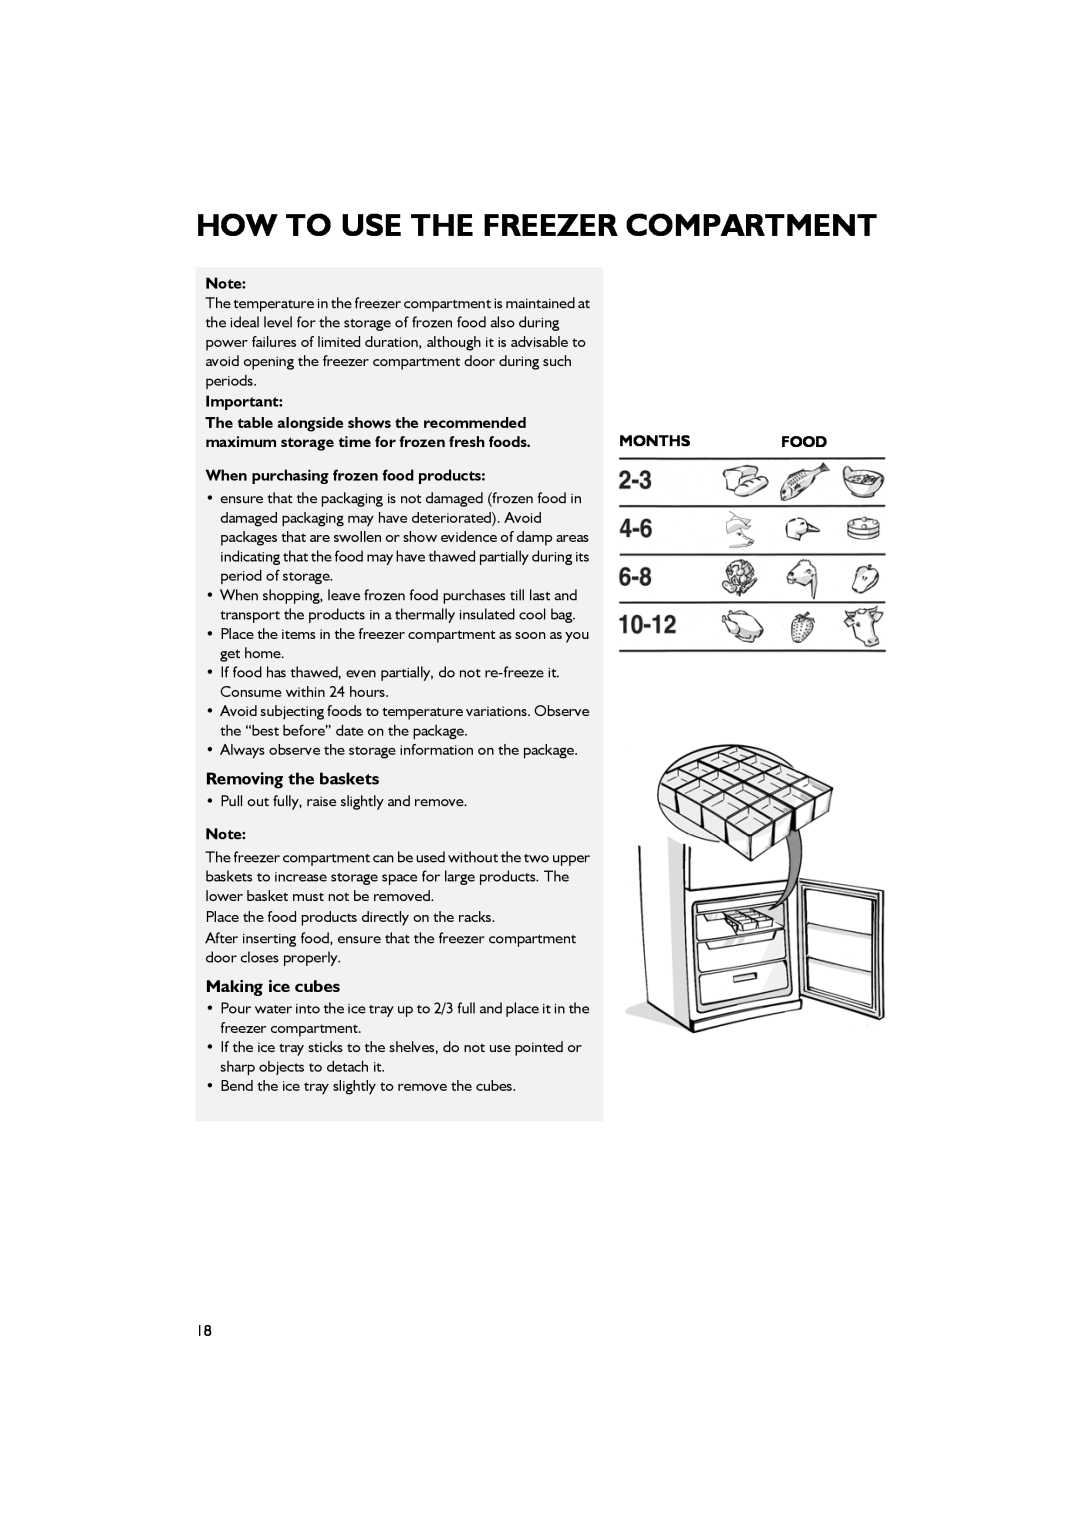 Smeg CR326AP7 Removing the baskets, Making ice cubes, periods, The table alongside shows the recommended, Months, Food 